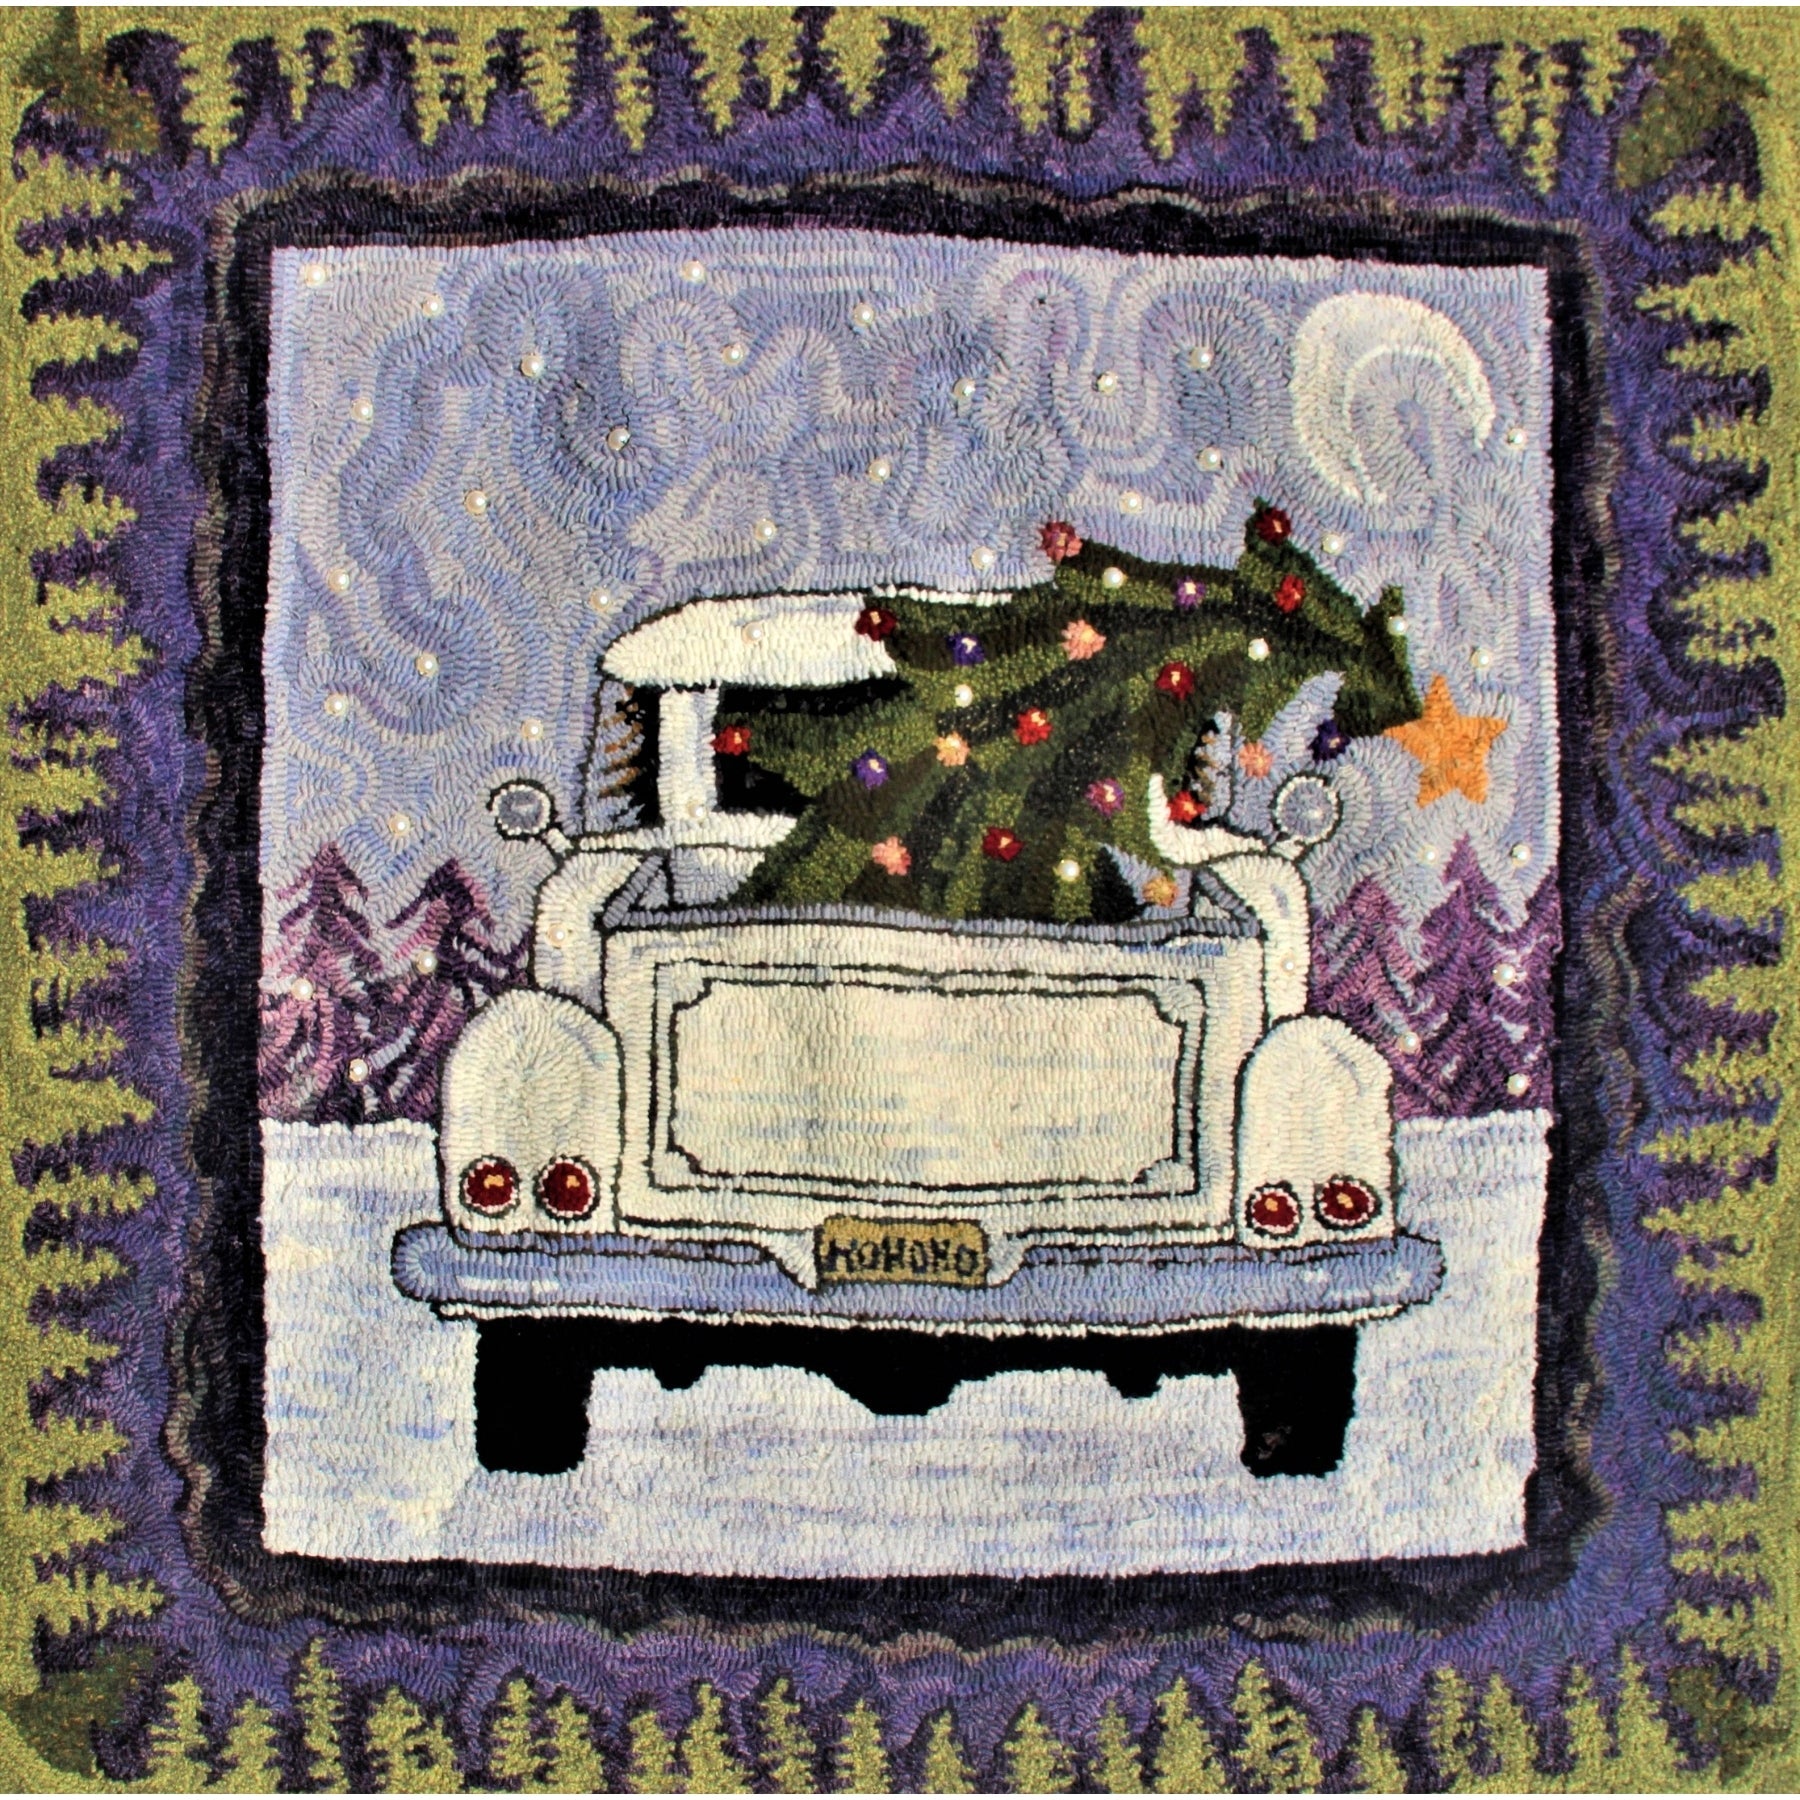 Red Christmas Truck, rug hooked by Suzanne White (adapted)